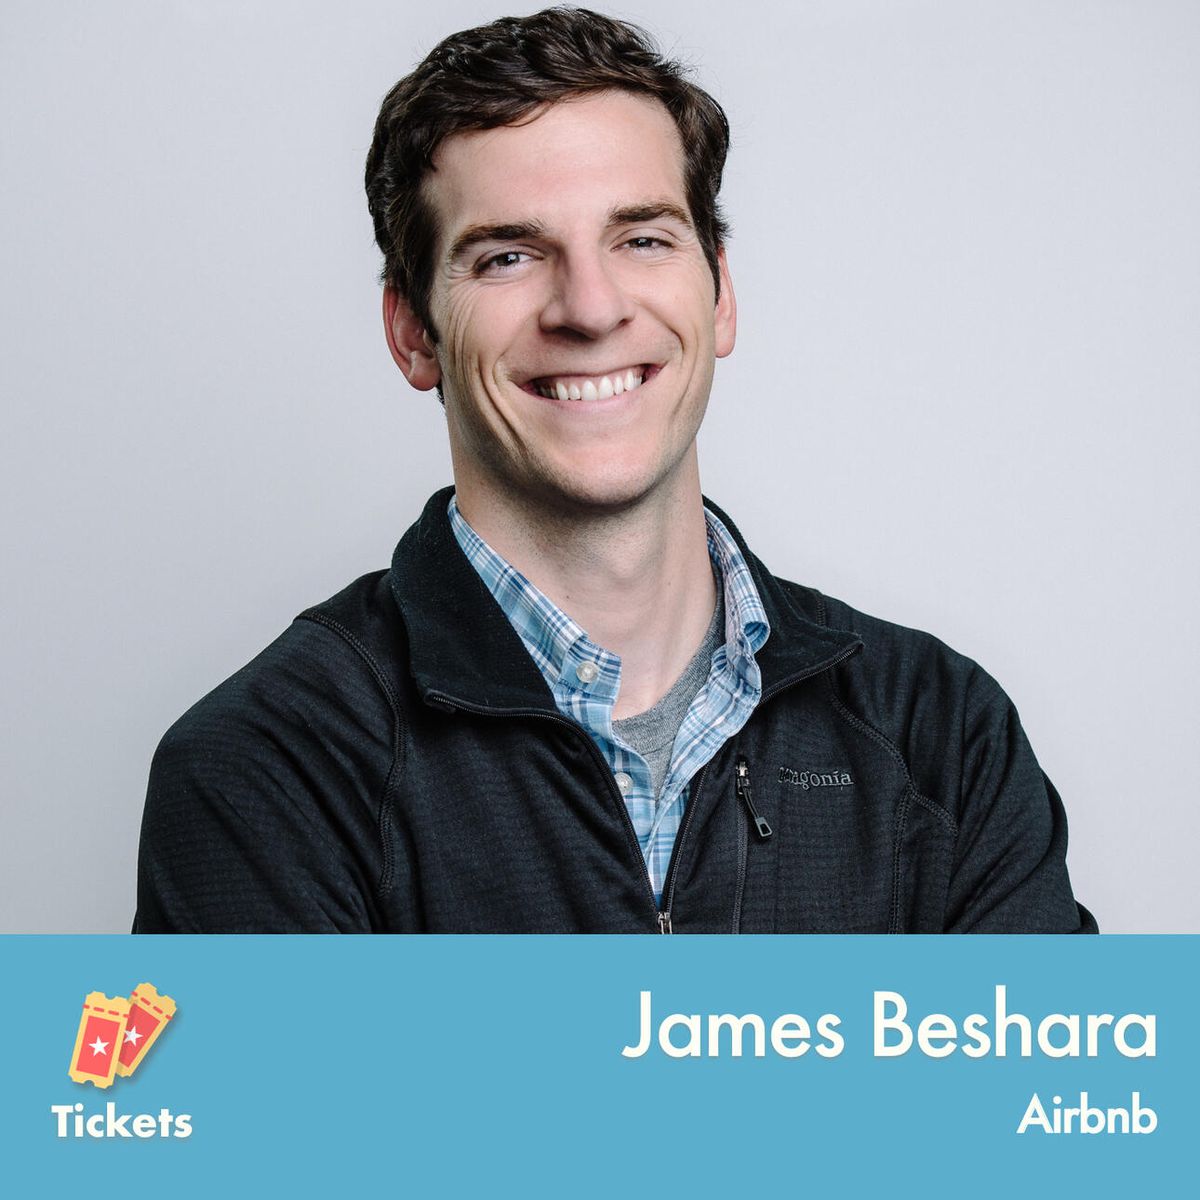 Tickets Podcast: Scaling human connection through music with James Beshara (Head of Music, Airbnb)